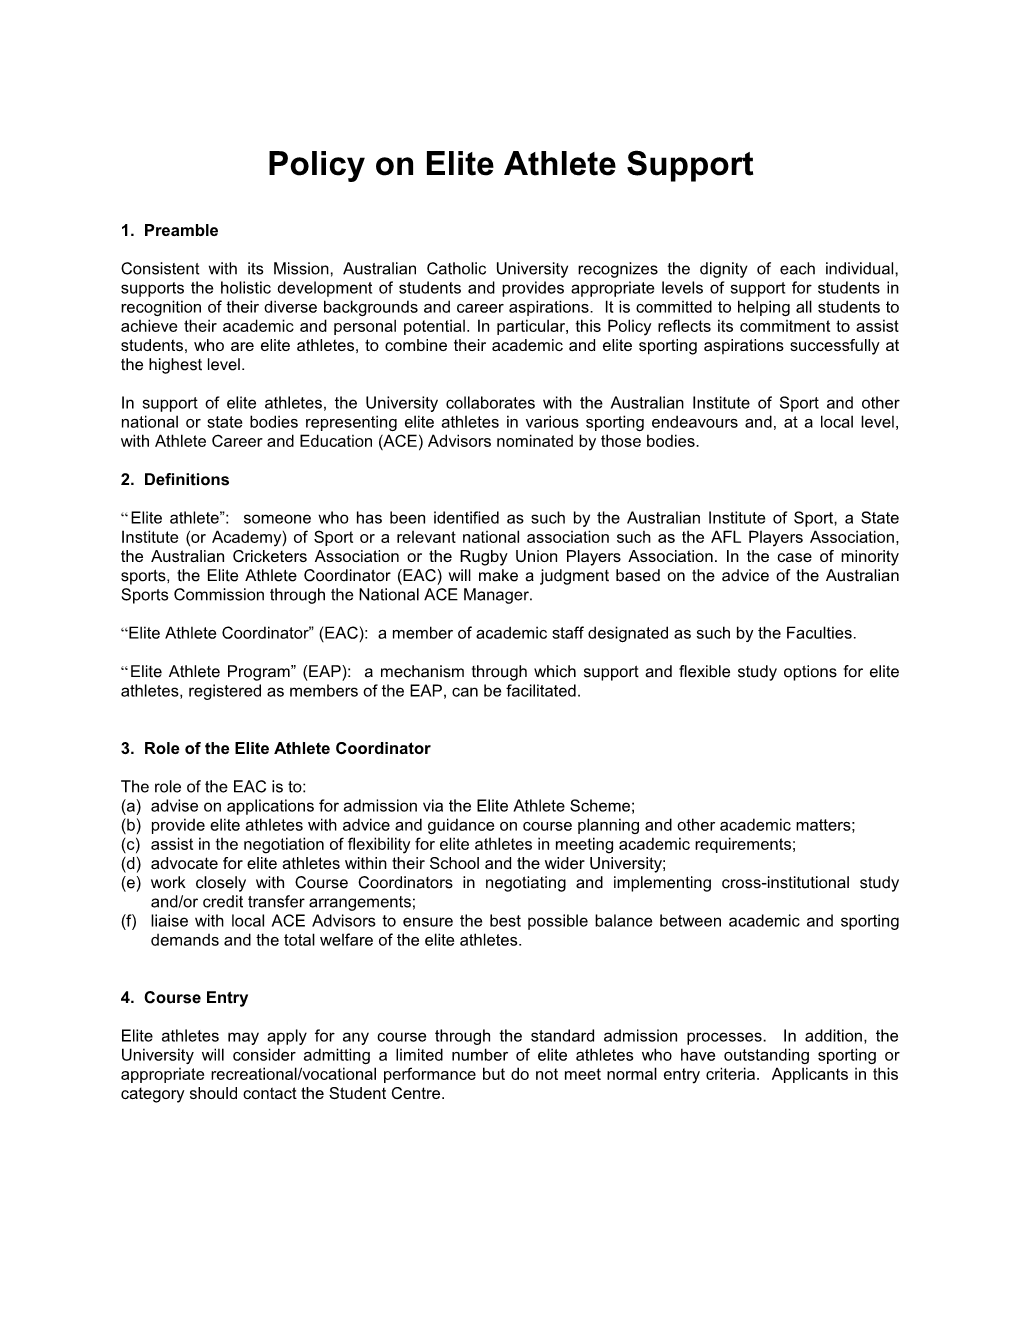 Draft Policies for Elite Athlete Support